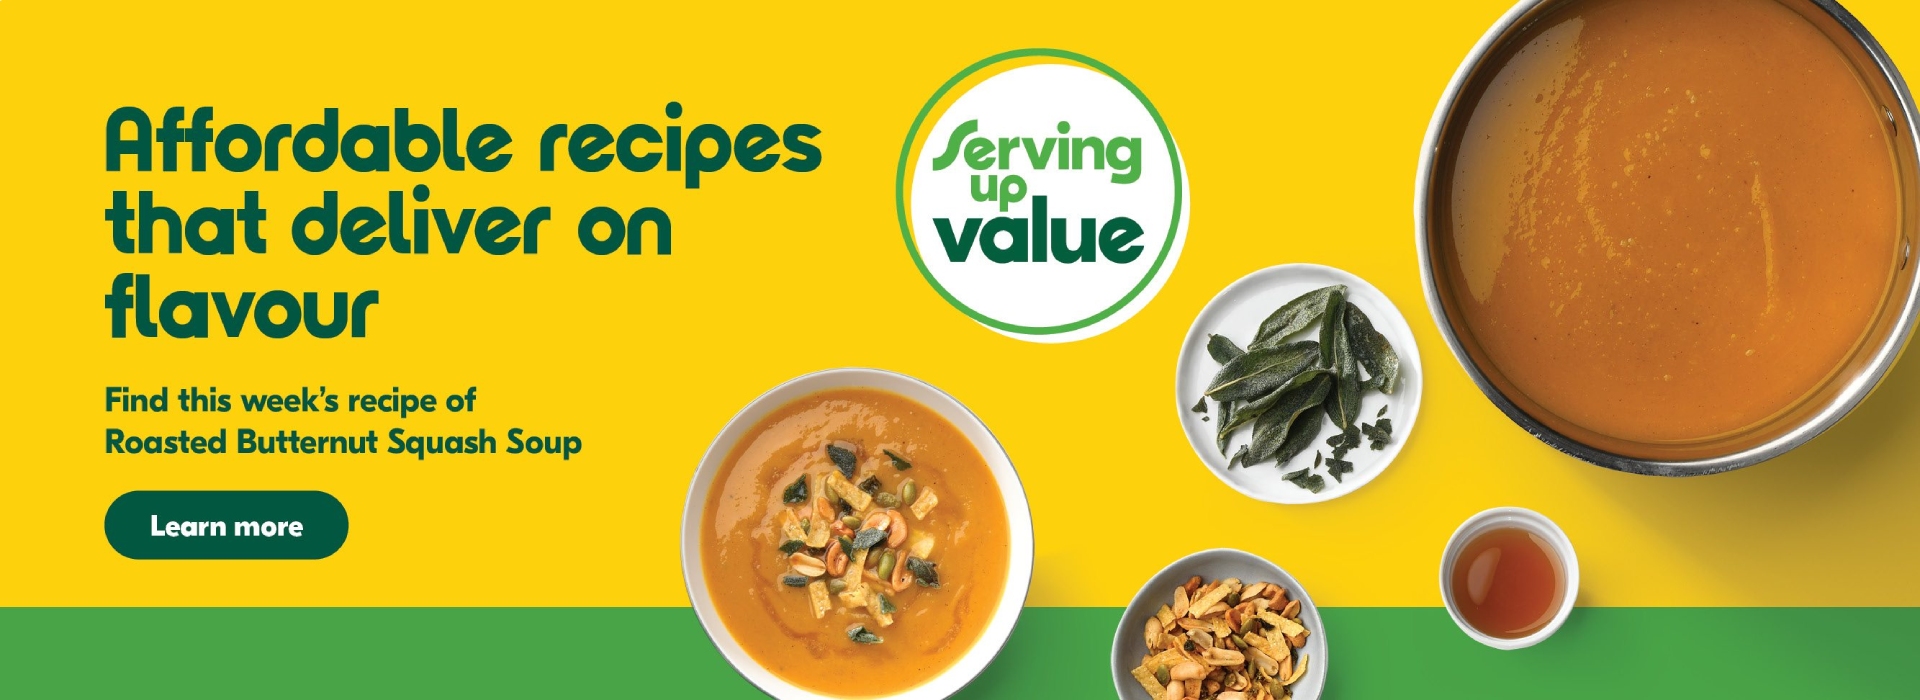 Serving up Value; Affordable Recipes that deliver on flavour. Find this week's recipe of Roasted Butternut Squash Soup Bowl with butternut squash soup with crouton topping. Surrounded by a large bowl with butternt squash soup, a plate with sage, a bowl with brown butter sauce, and a bowl with crouton topping.